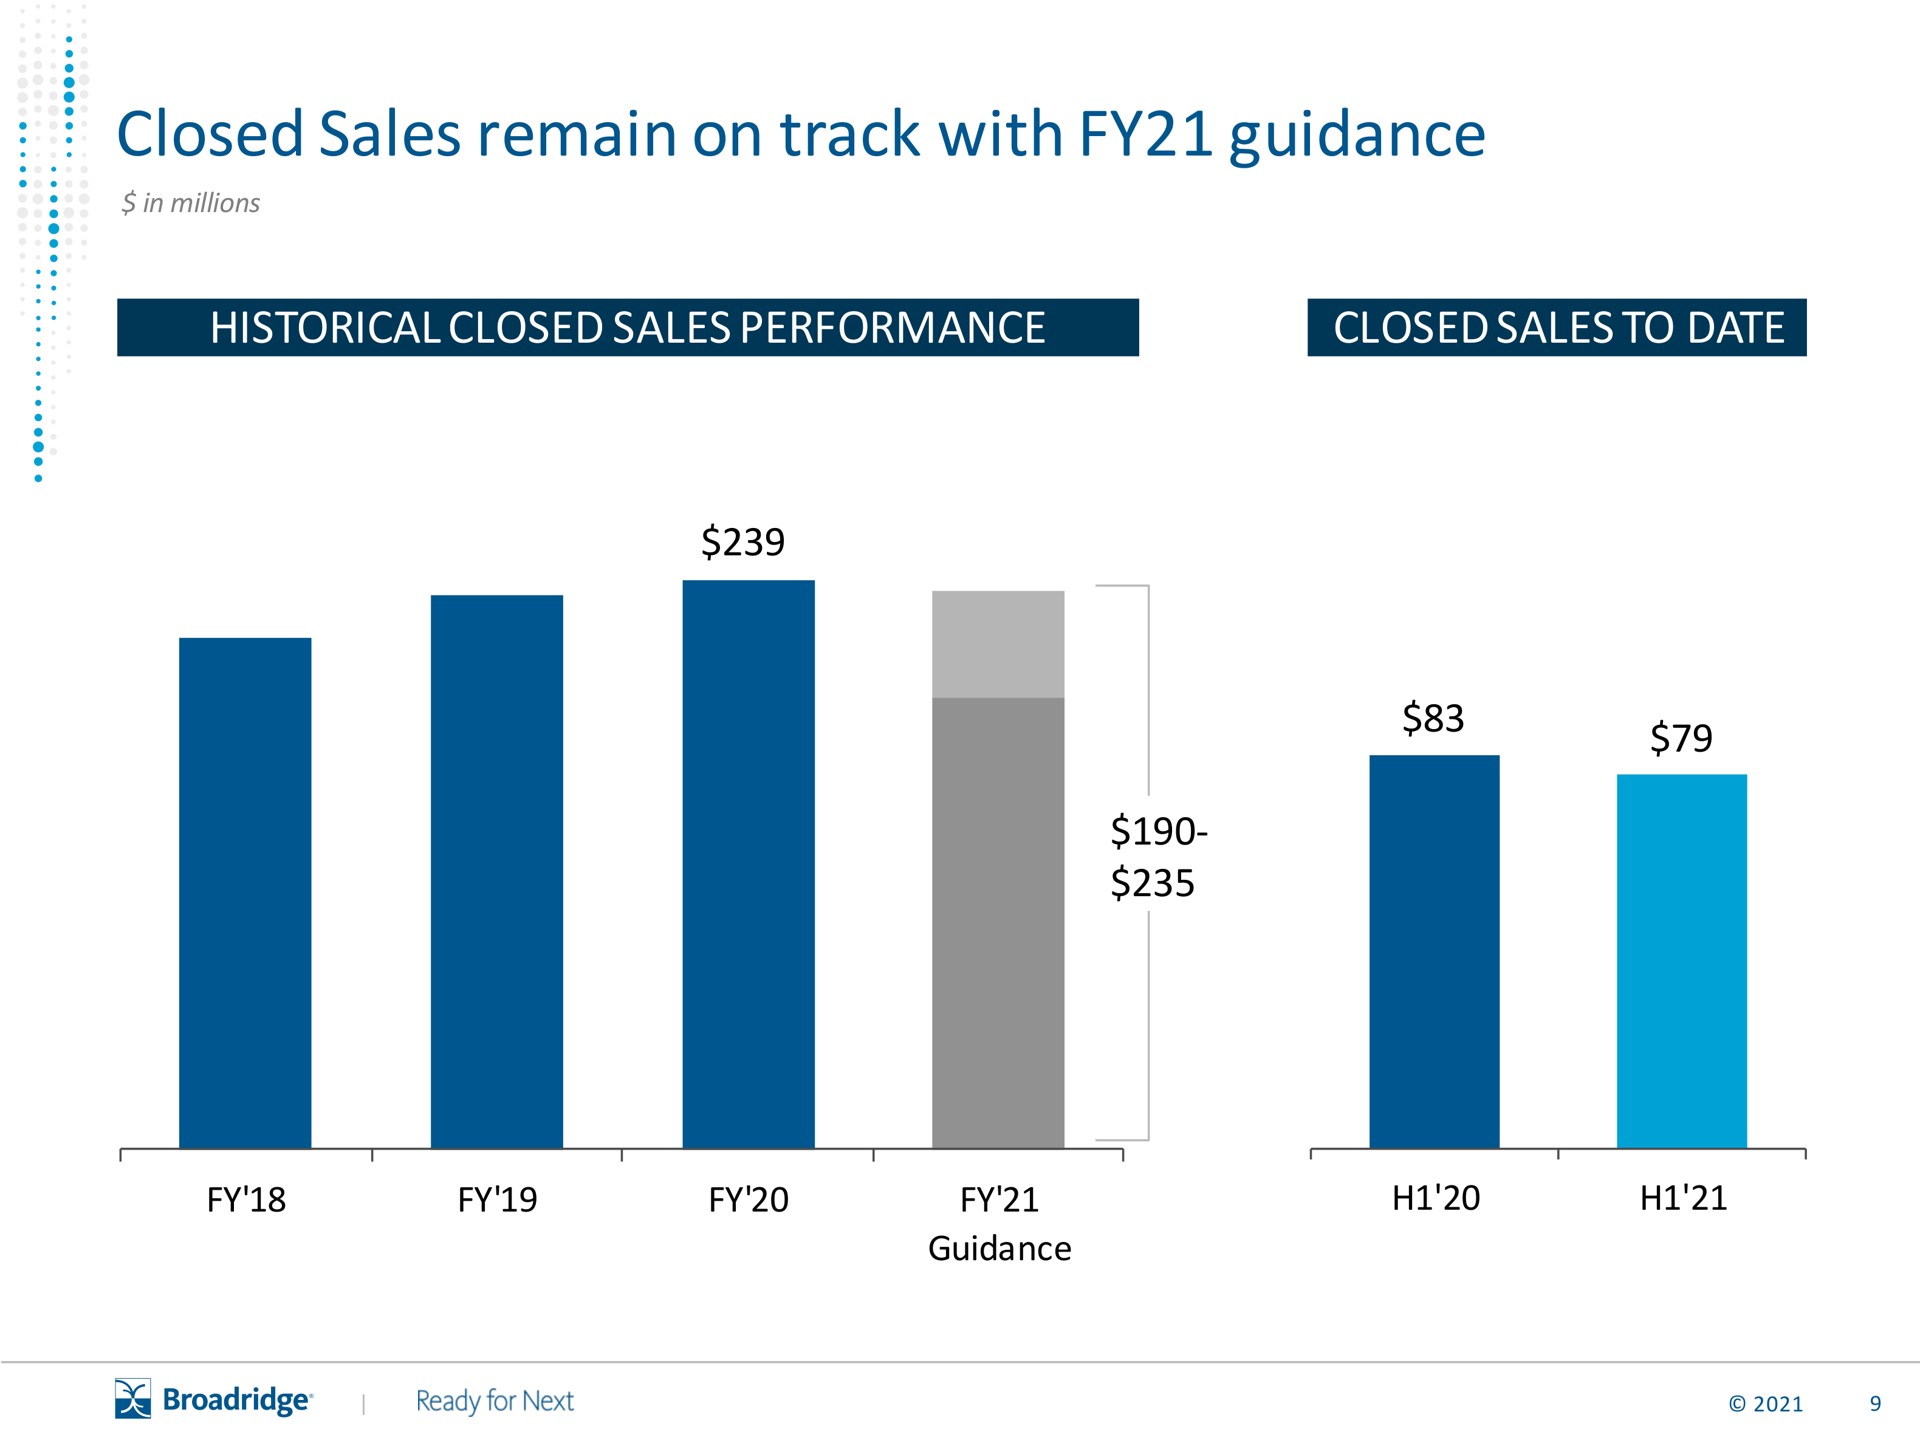 closed sales remain on track with guidance | Broadridge Financial Solutions